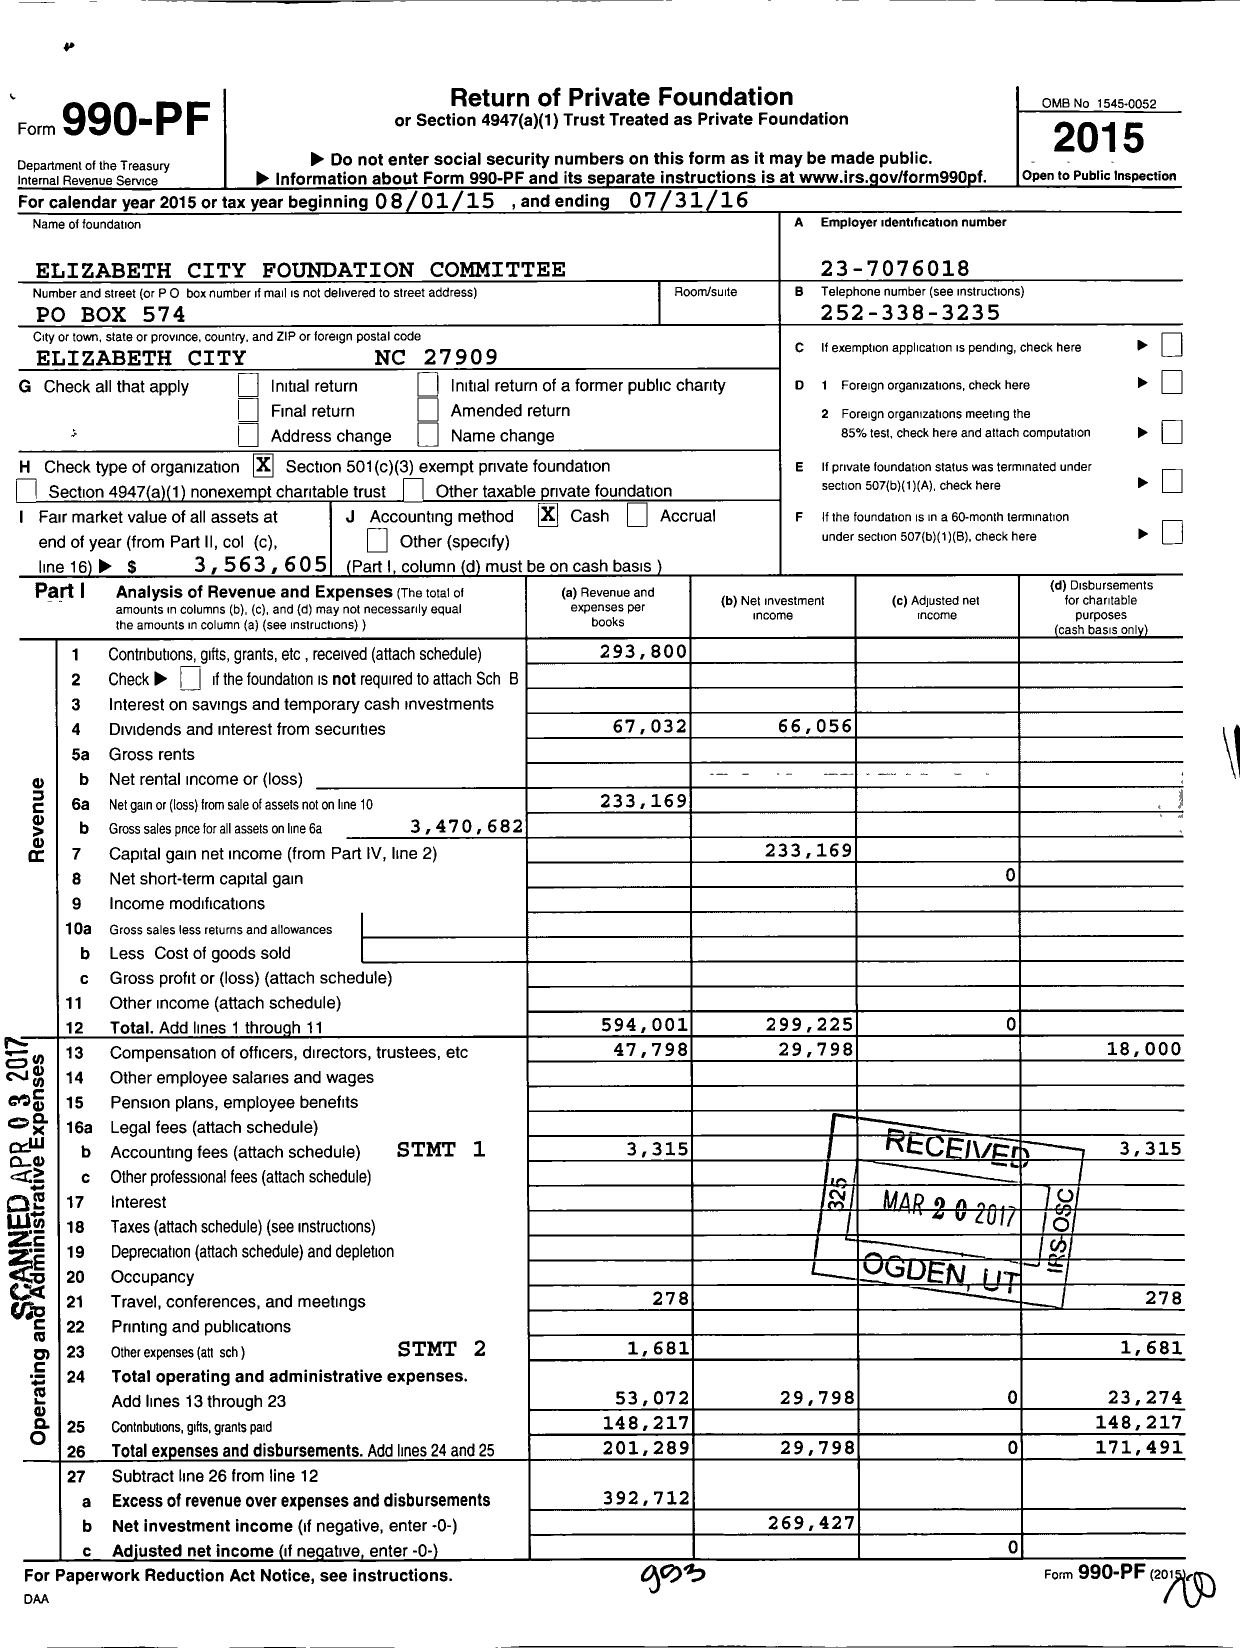 Image of first page of 2015 Form 990PF for Elizabeth City Foundation Committee